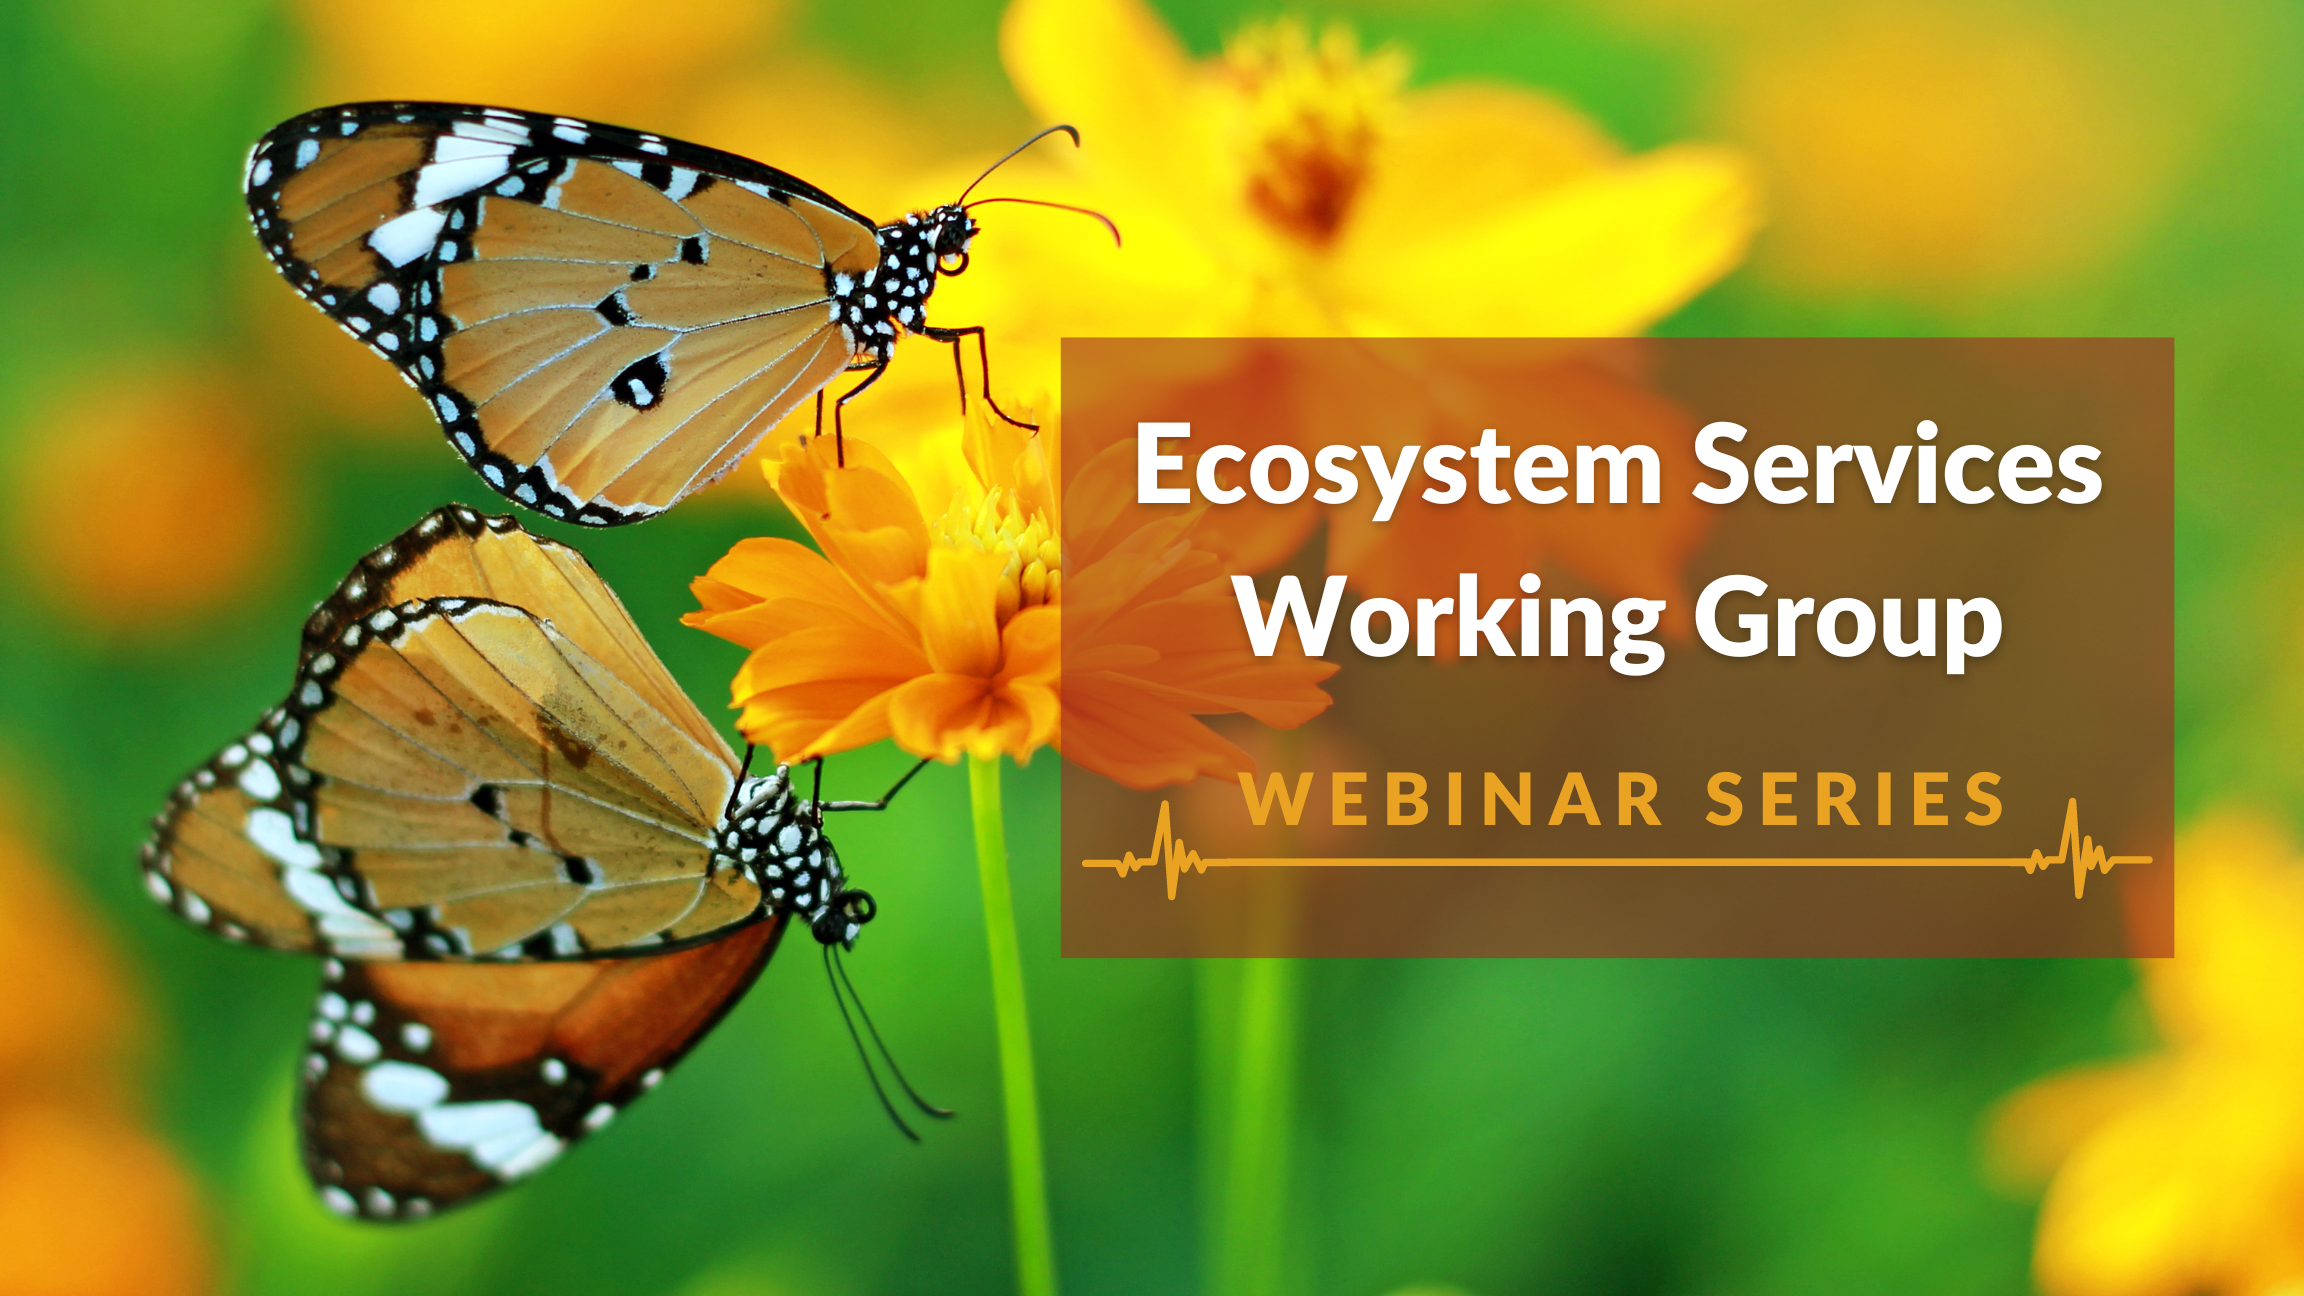 Ecosystem Services Working Group Webinar Series